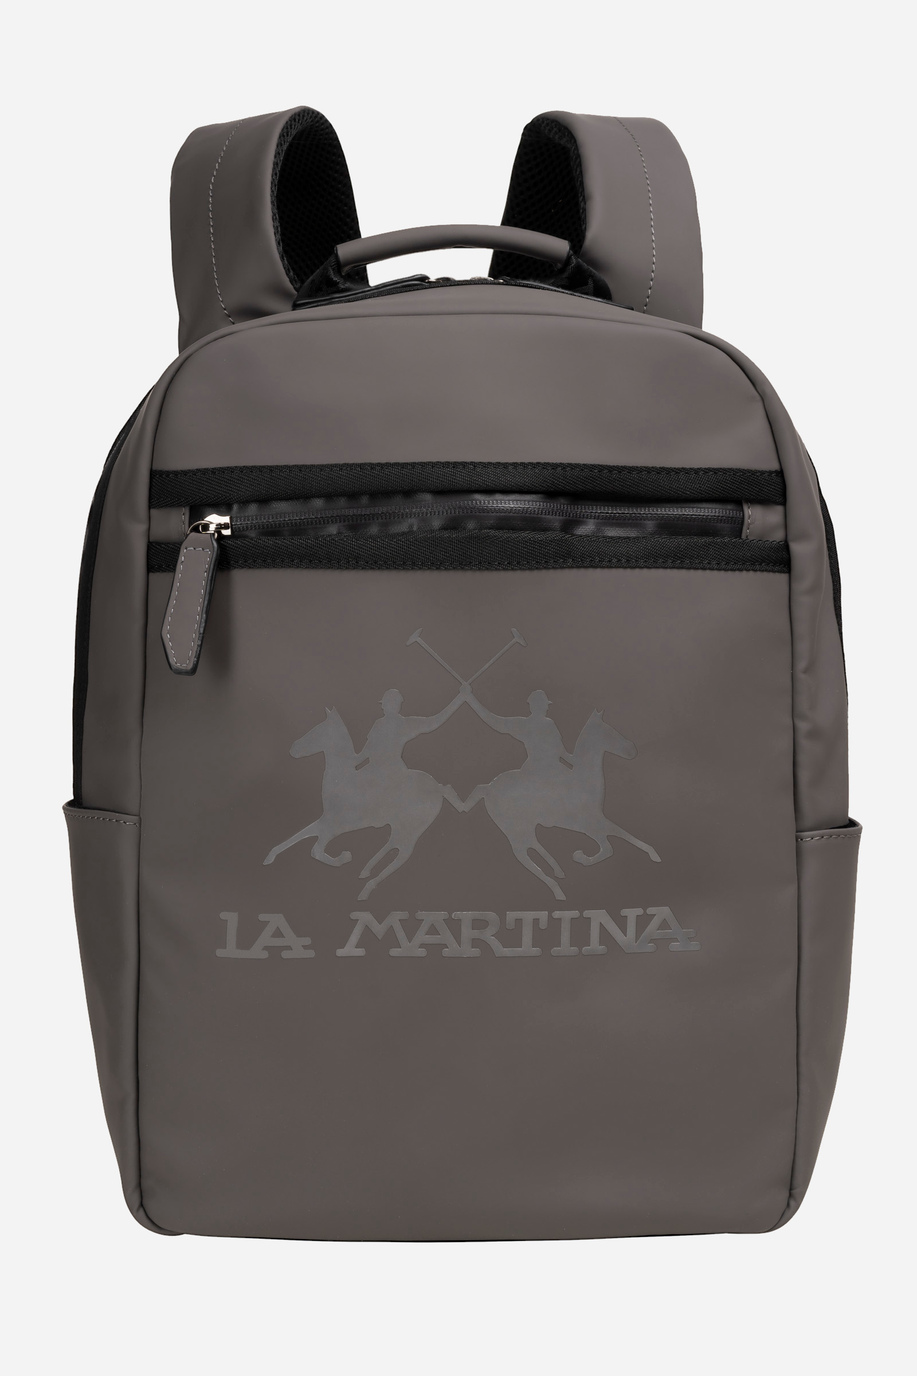 Backpack solid color gray fabric pu - Augusto - presale | La Martina - Official Online Shop